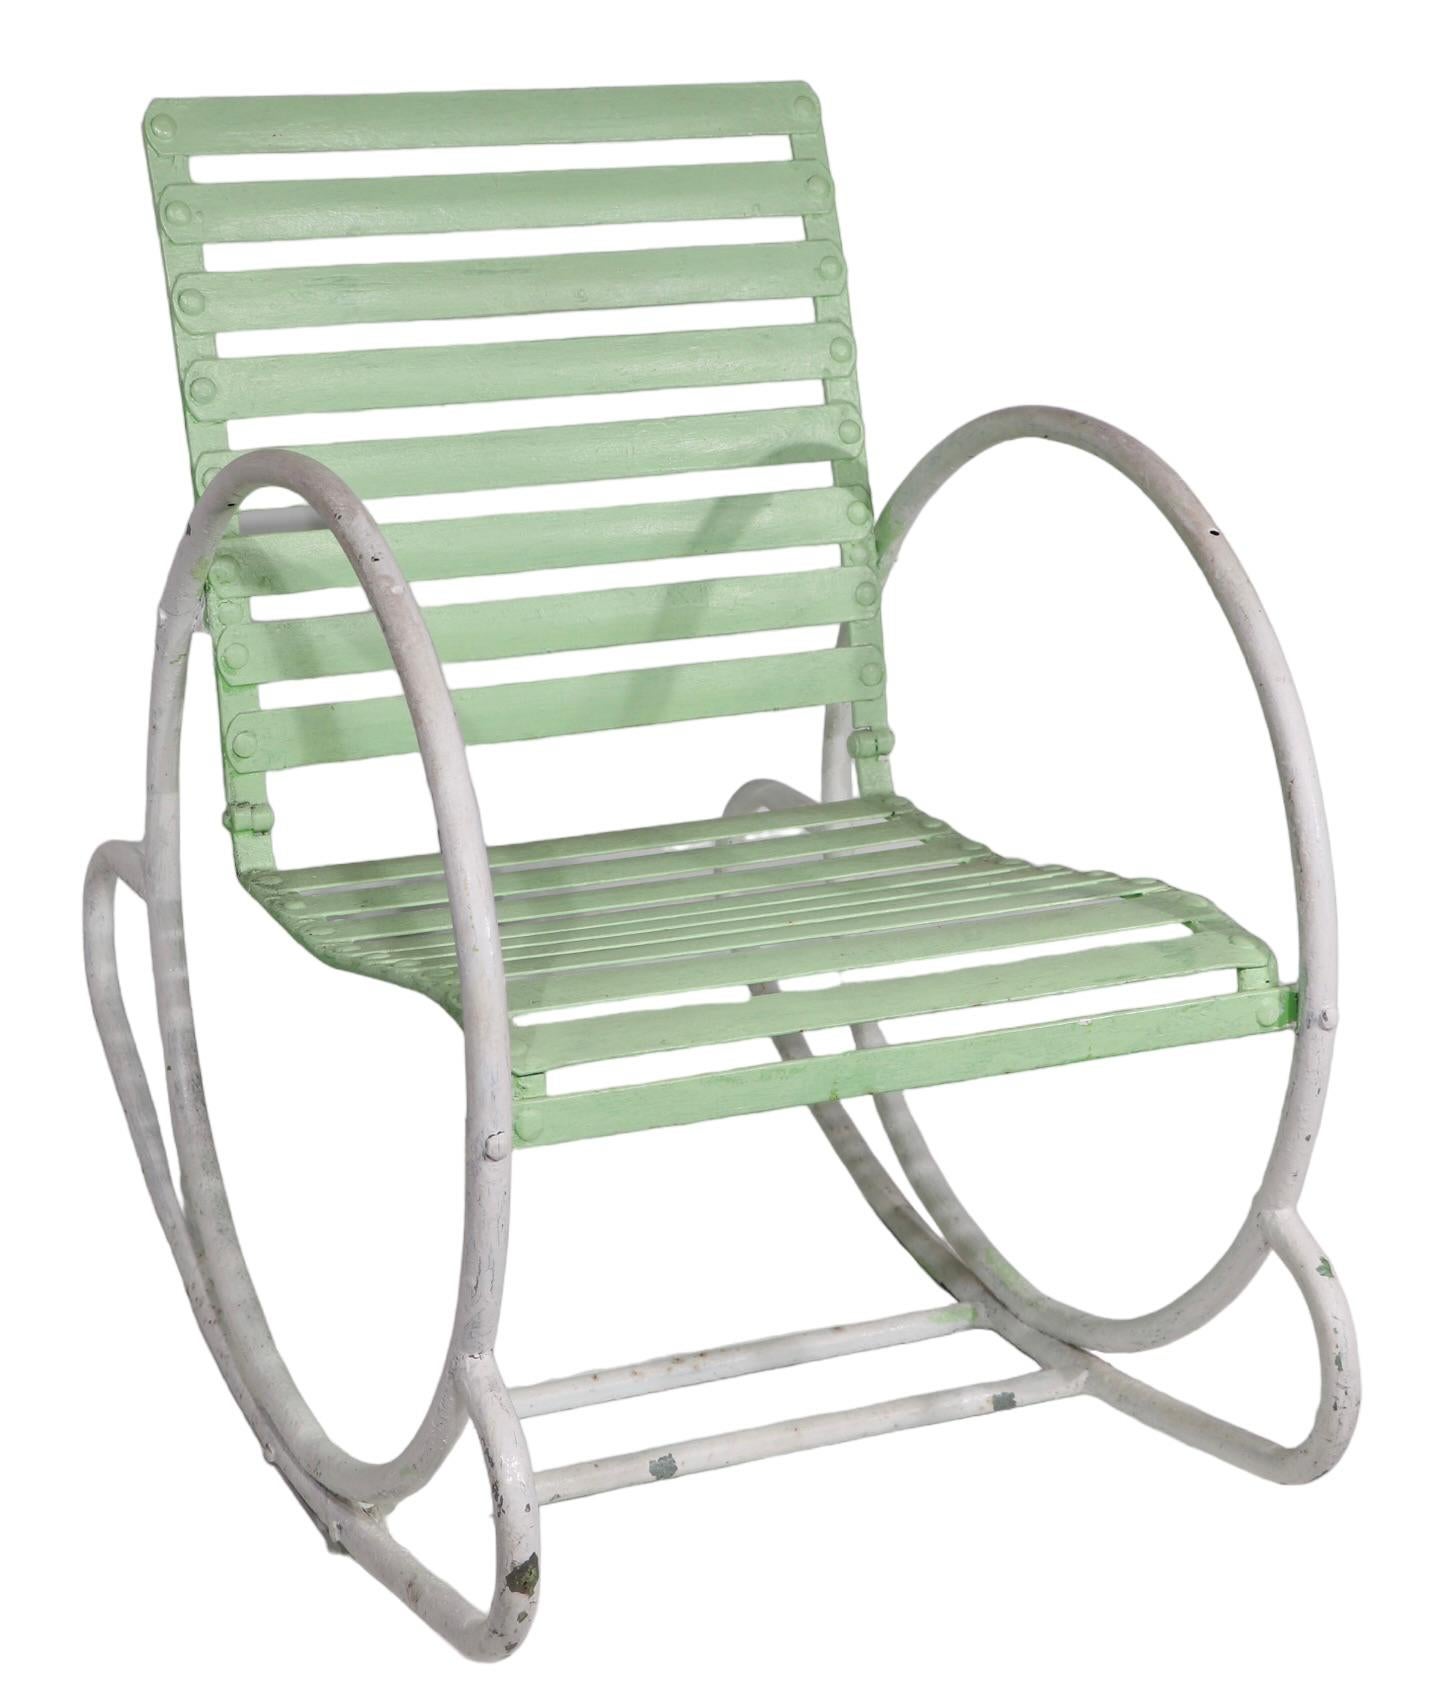 Art Deco Iron and Steel Garden Patio Poolside  Hoop Frame Rocking Chair c 1930's For Sale 9